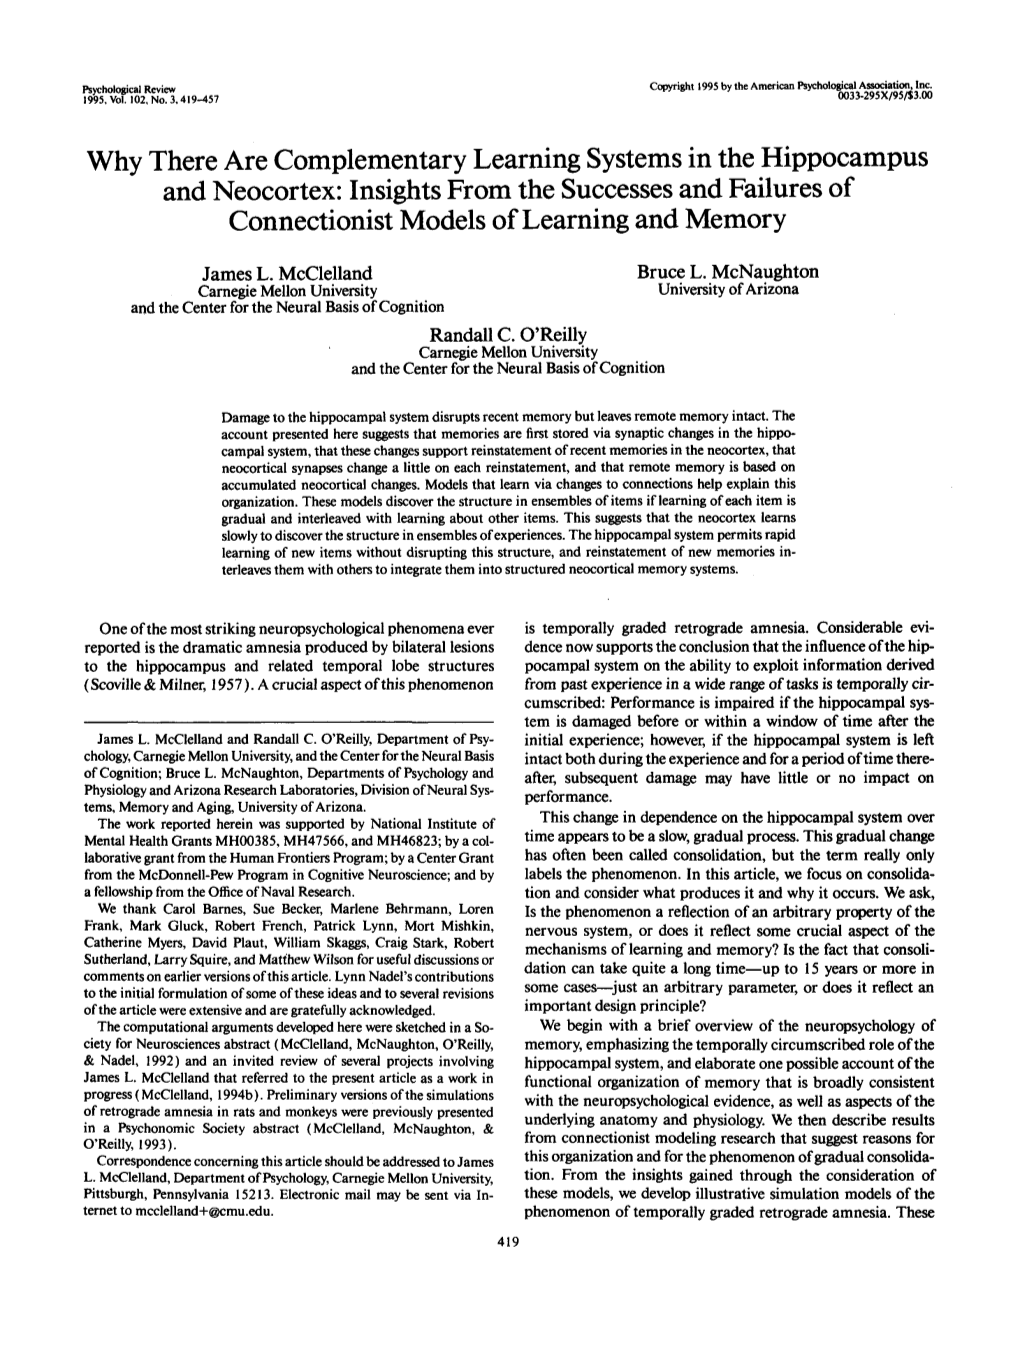 Why There Are Complementary Learning Systems in the Hippocampus and Neocortex: Insights from the Successes and Failures of Connectionist Models of Learning and Memory